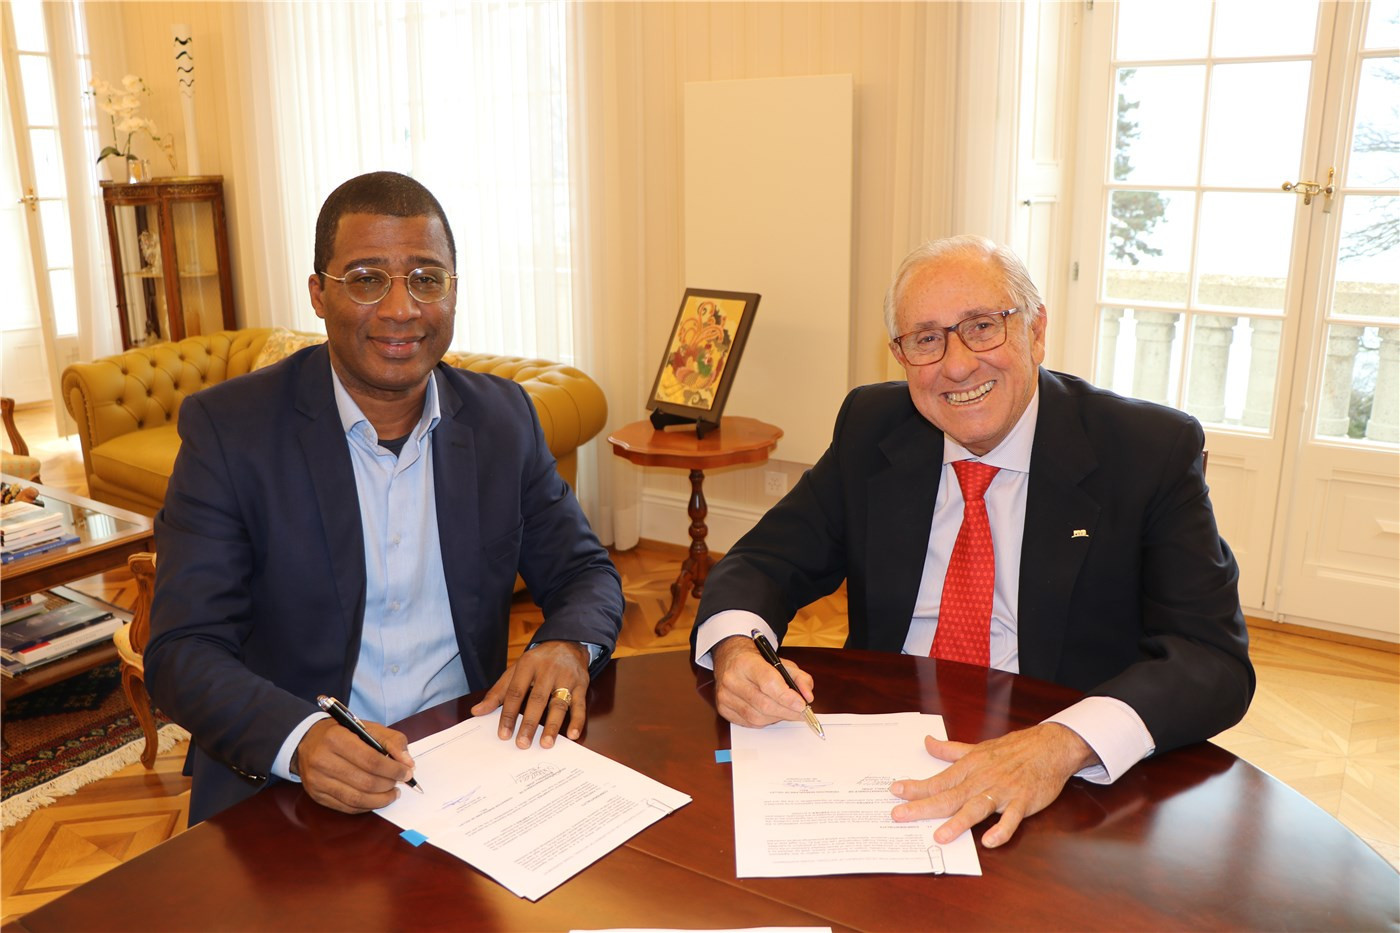 The pair signed an agreement to keep coaching support in Senegal for another 12 months ©FIVB